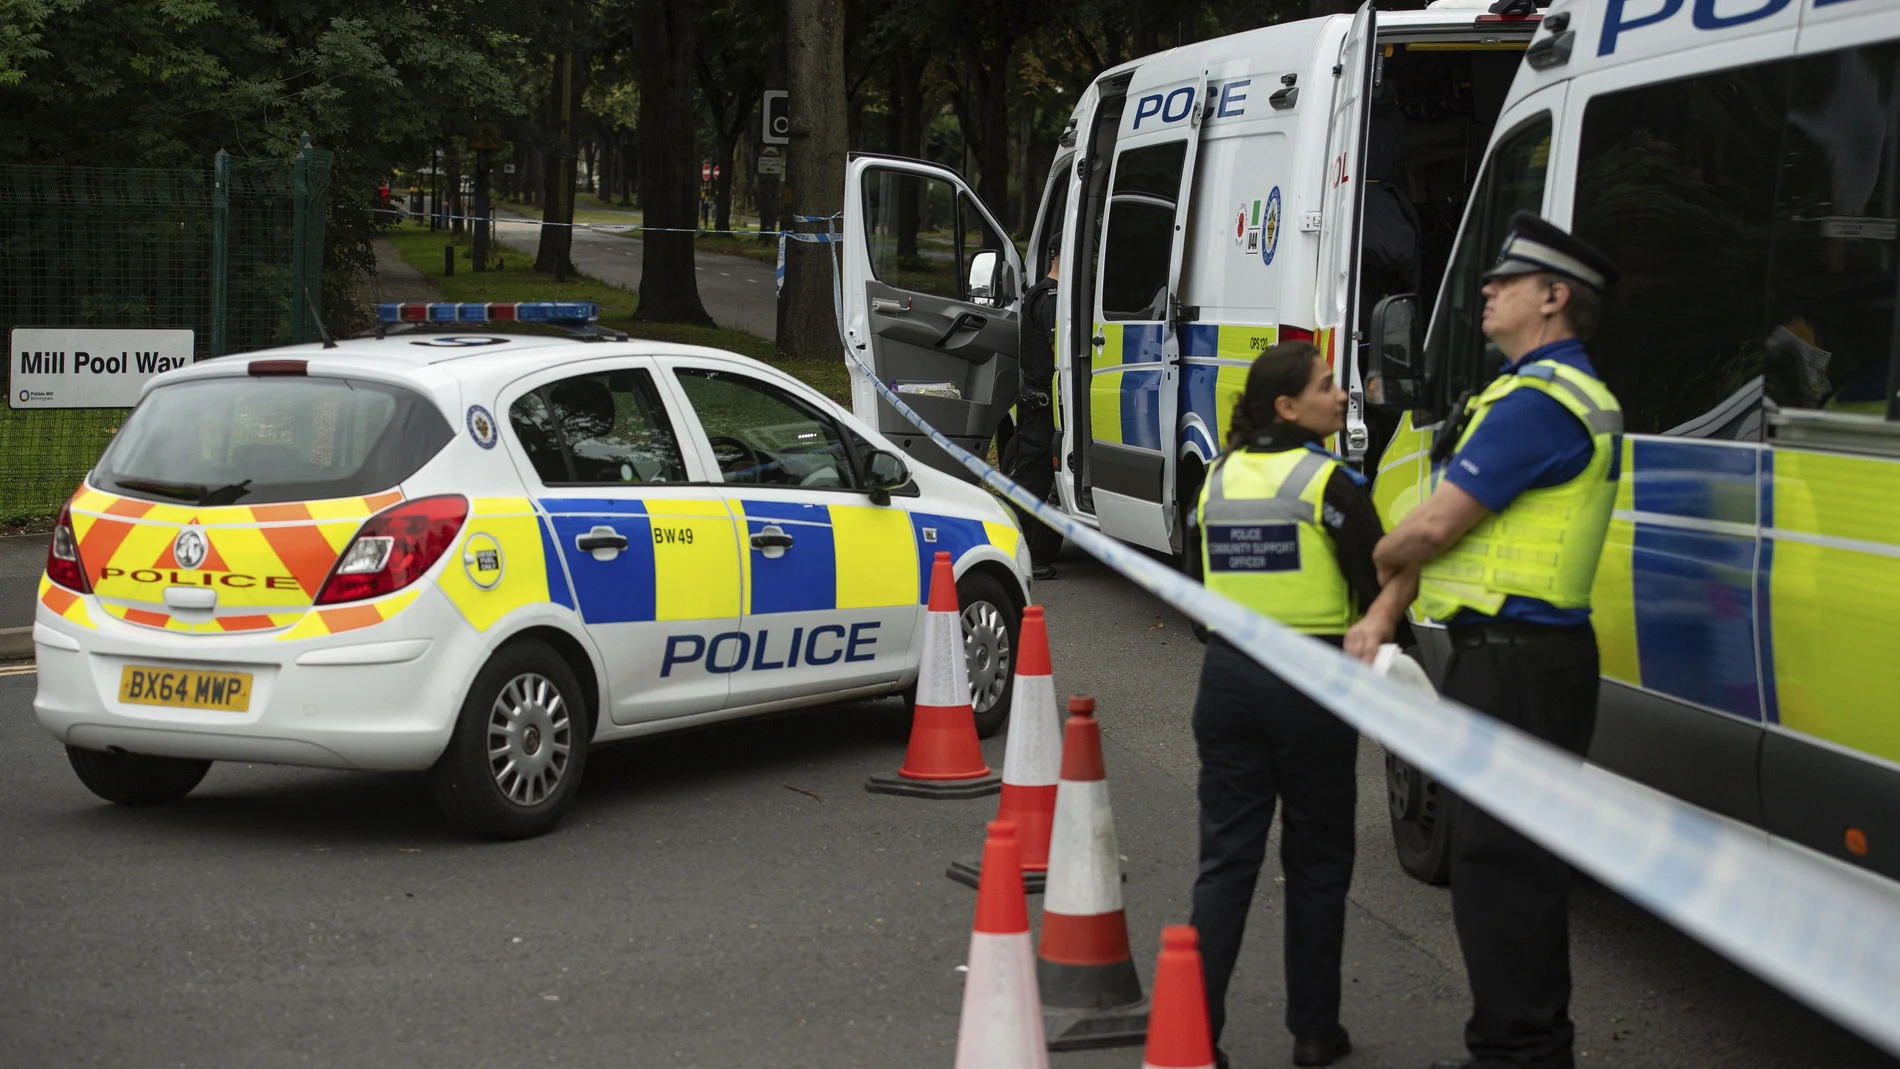 Police officers secure the area after a man was found fatally stabbed late Saturday, in Birmingham, England, Sunday Aug. 23, 2020. A 15-year-old girl and a 28-year-old woman were detained at the scene and according to the police, they remain in custody. (Jacob King/PA via AP)